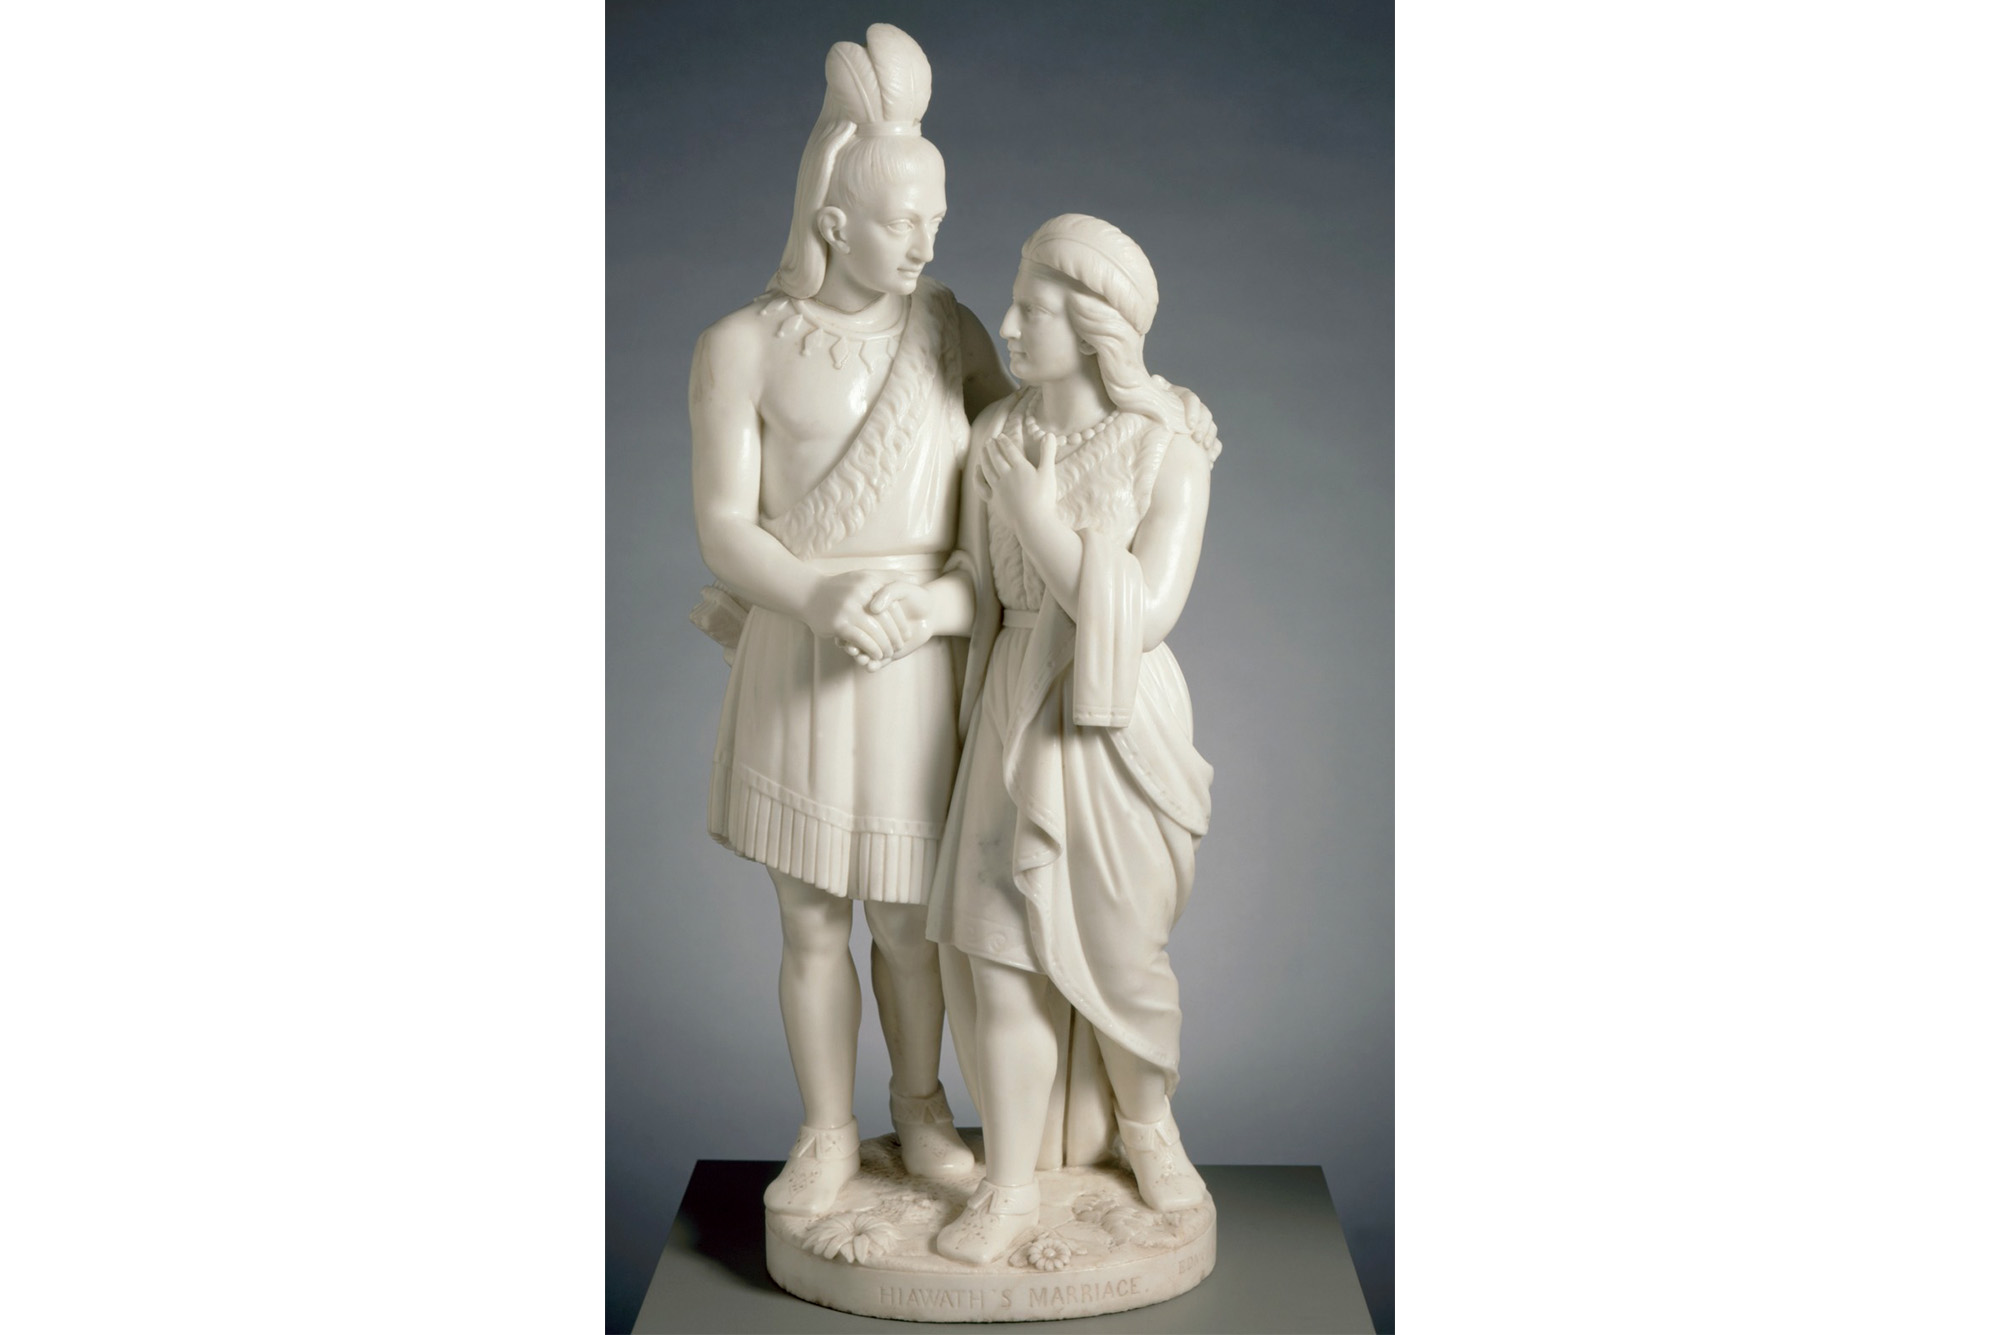 Edmonia Lewis' Hiawatha's Marriage, a marble sculpture of a Native American man and woman. The woman stands slightly ahead of the man and hold his right hand in hers, placing her left hand on her chest. The man places his left hand on her left shoulder as they look towards each other.